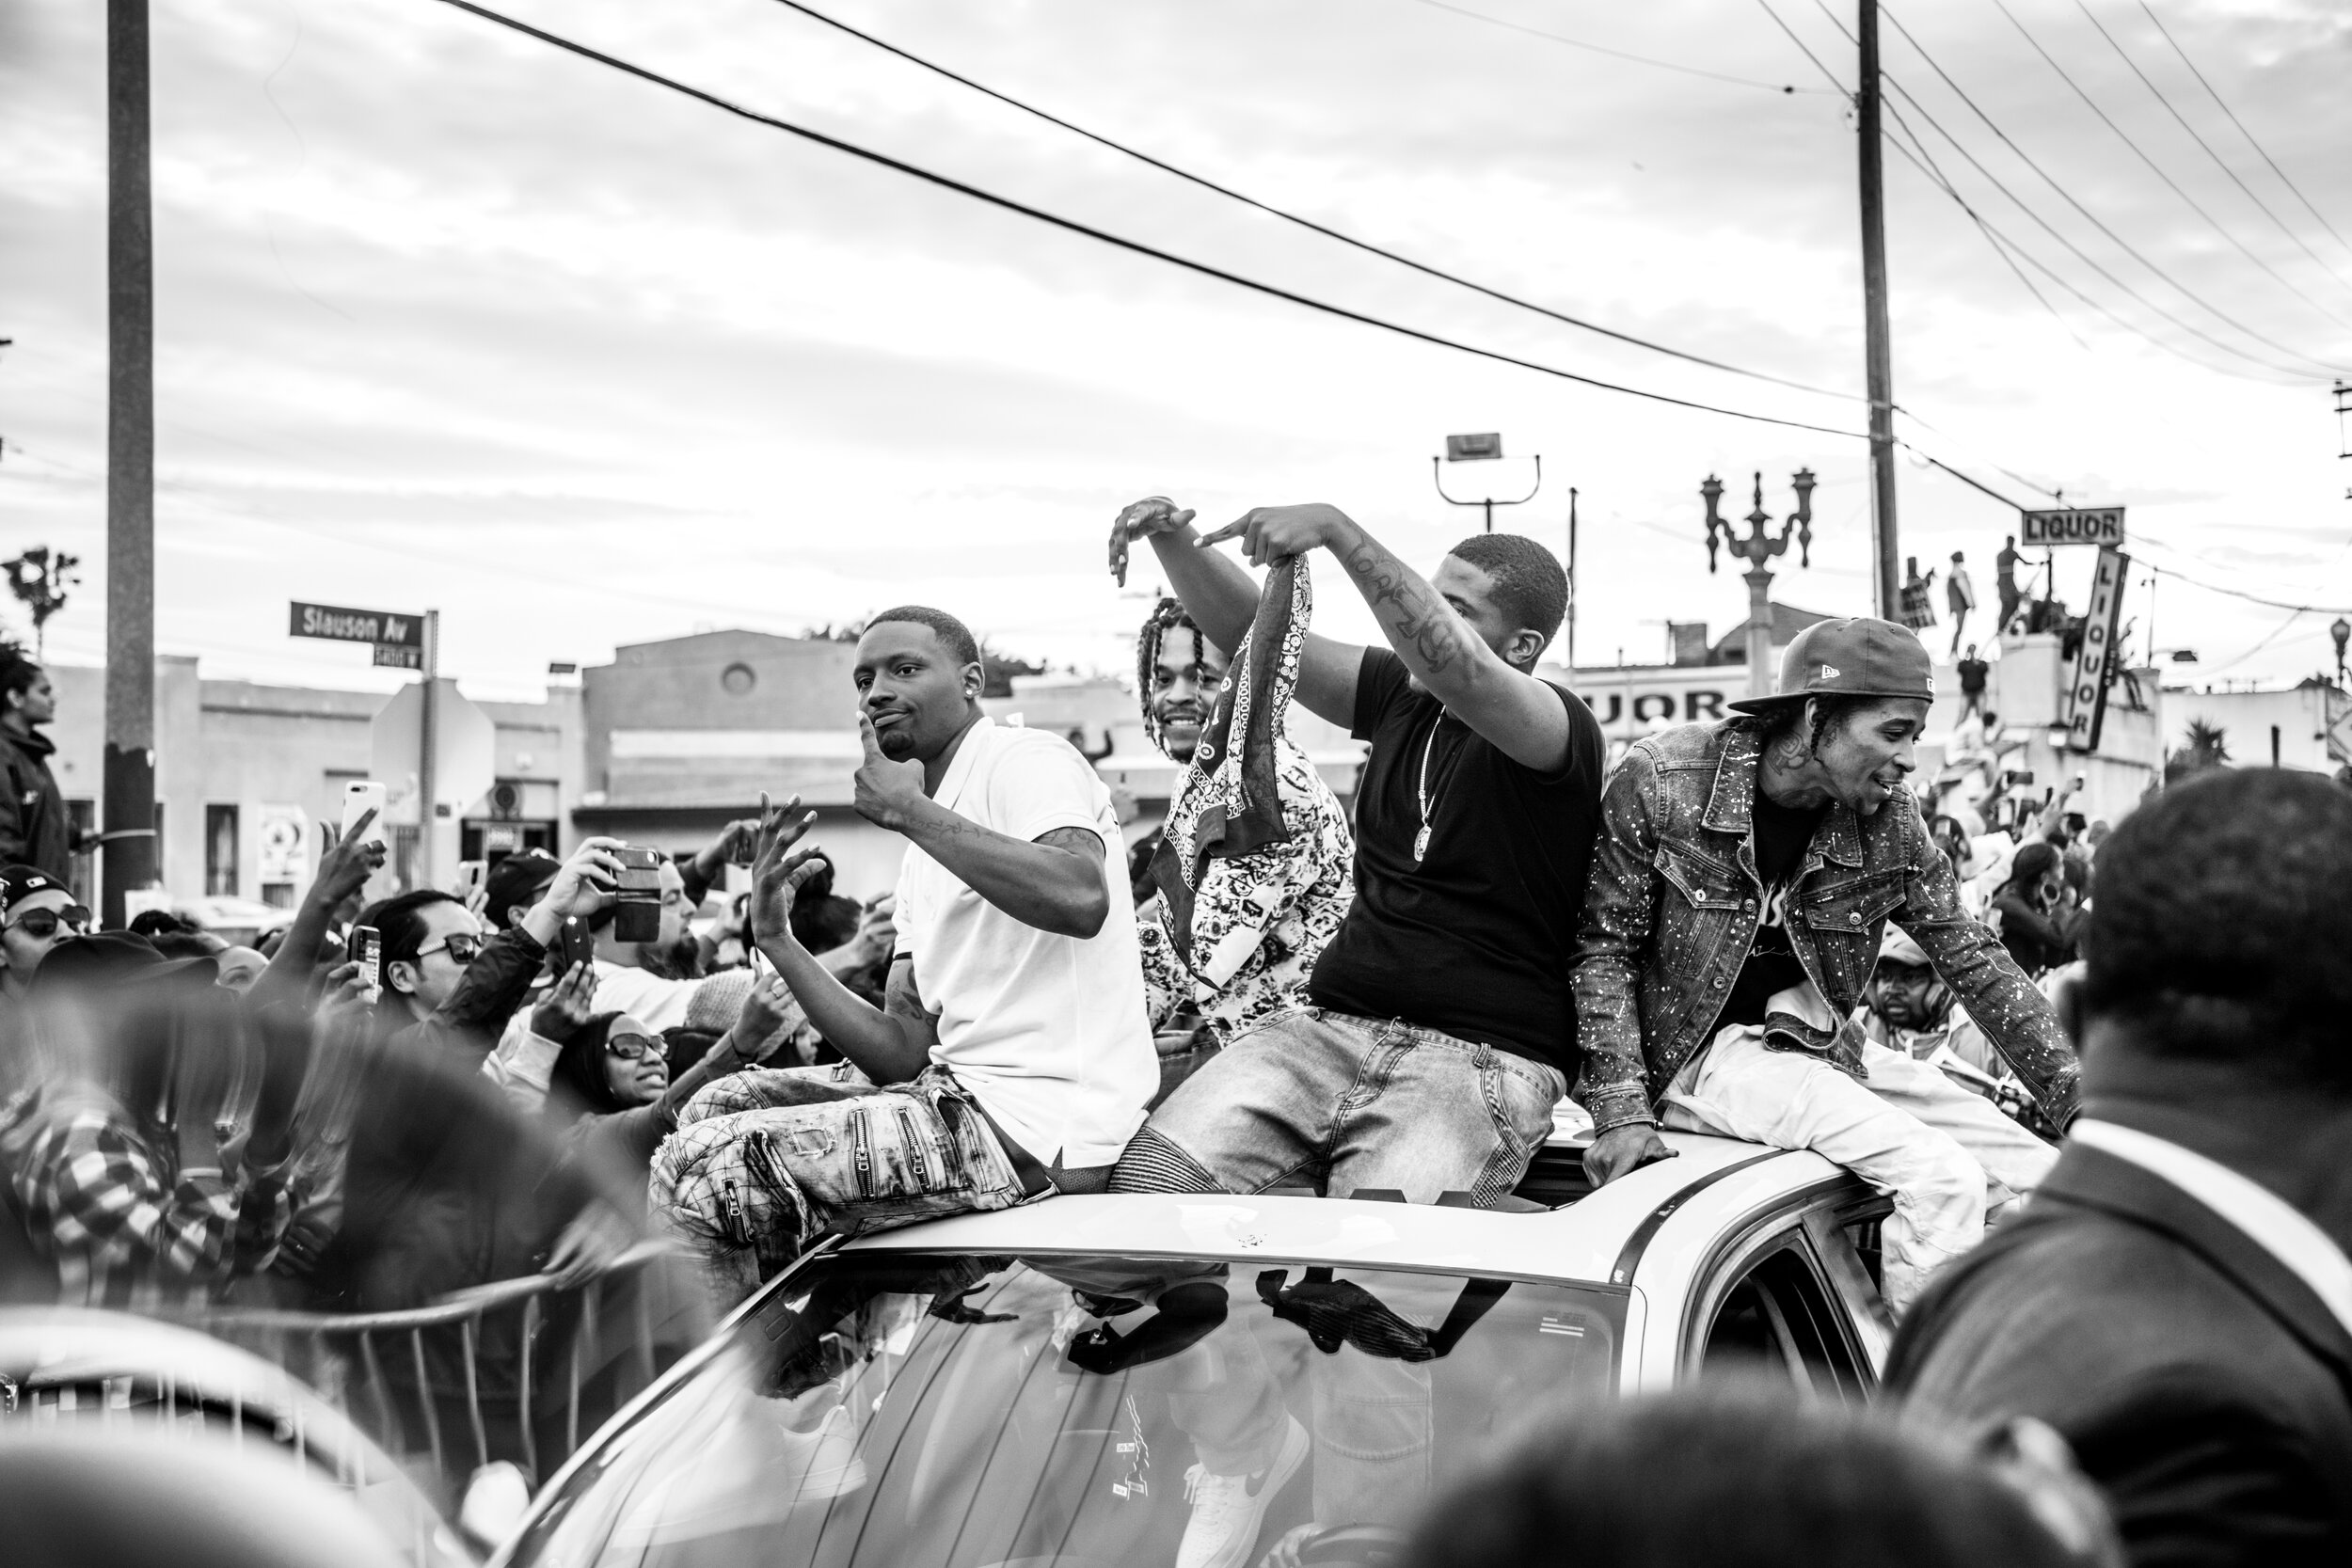  The Nipsey Hussle funeral procession moves down Slauson Avenue near The Marathon Clothing Store on April 11, 2019.  